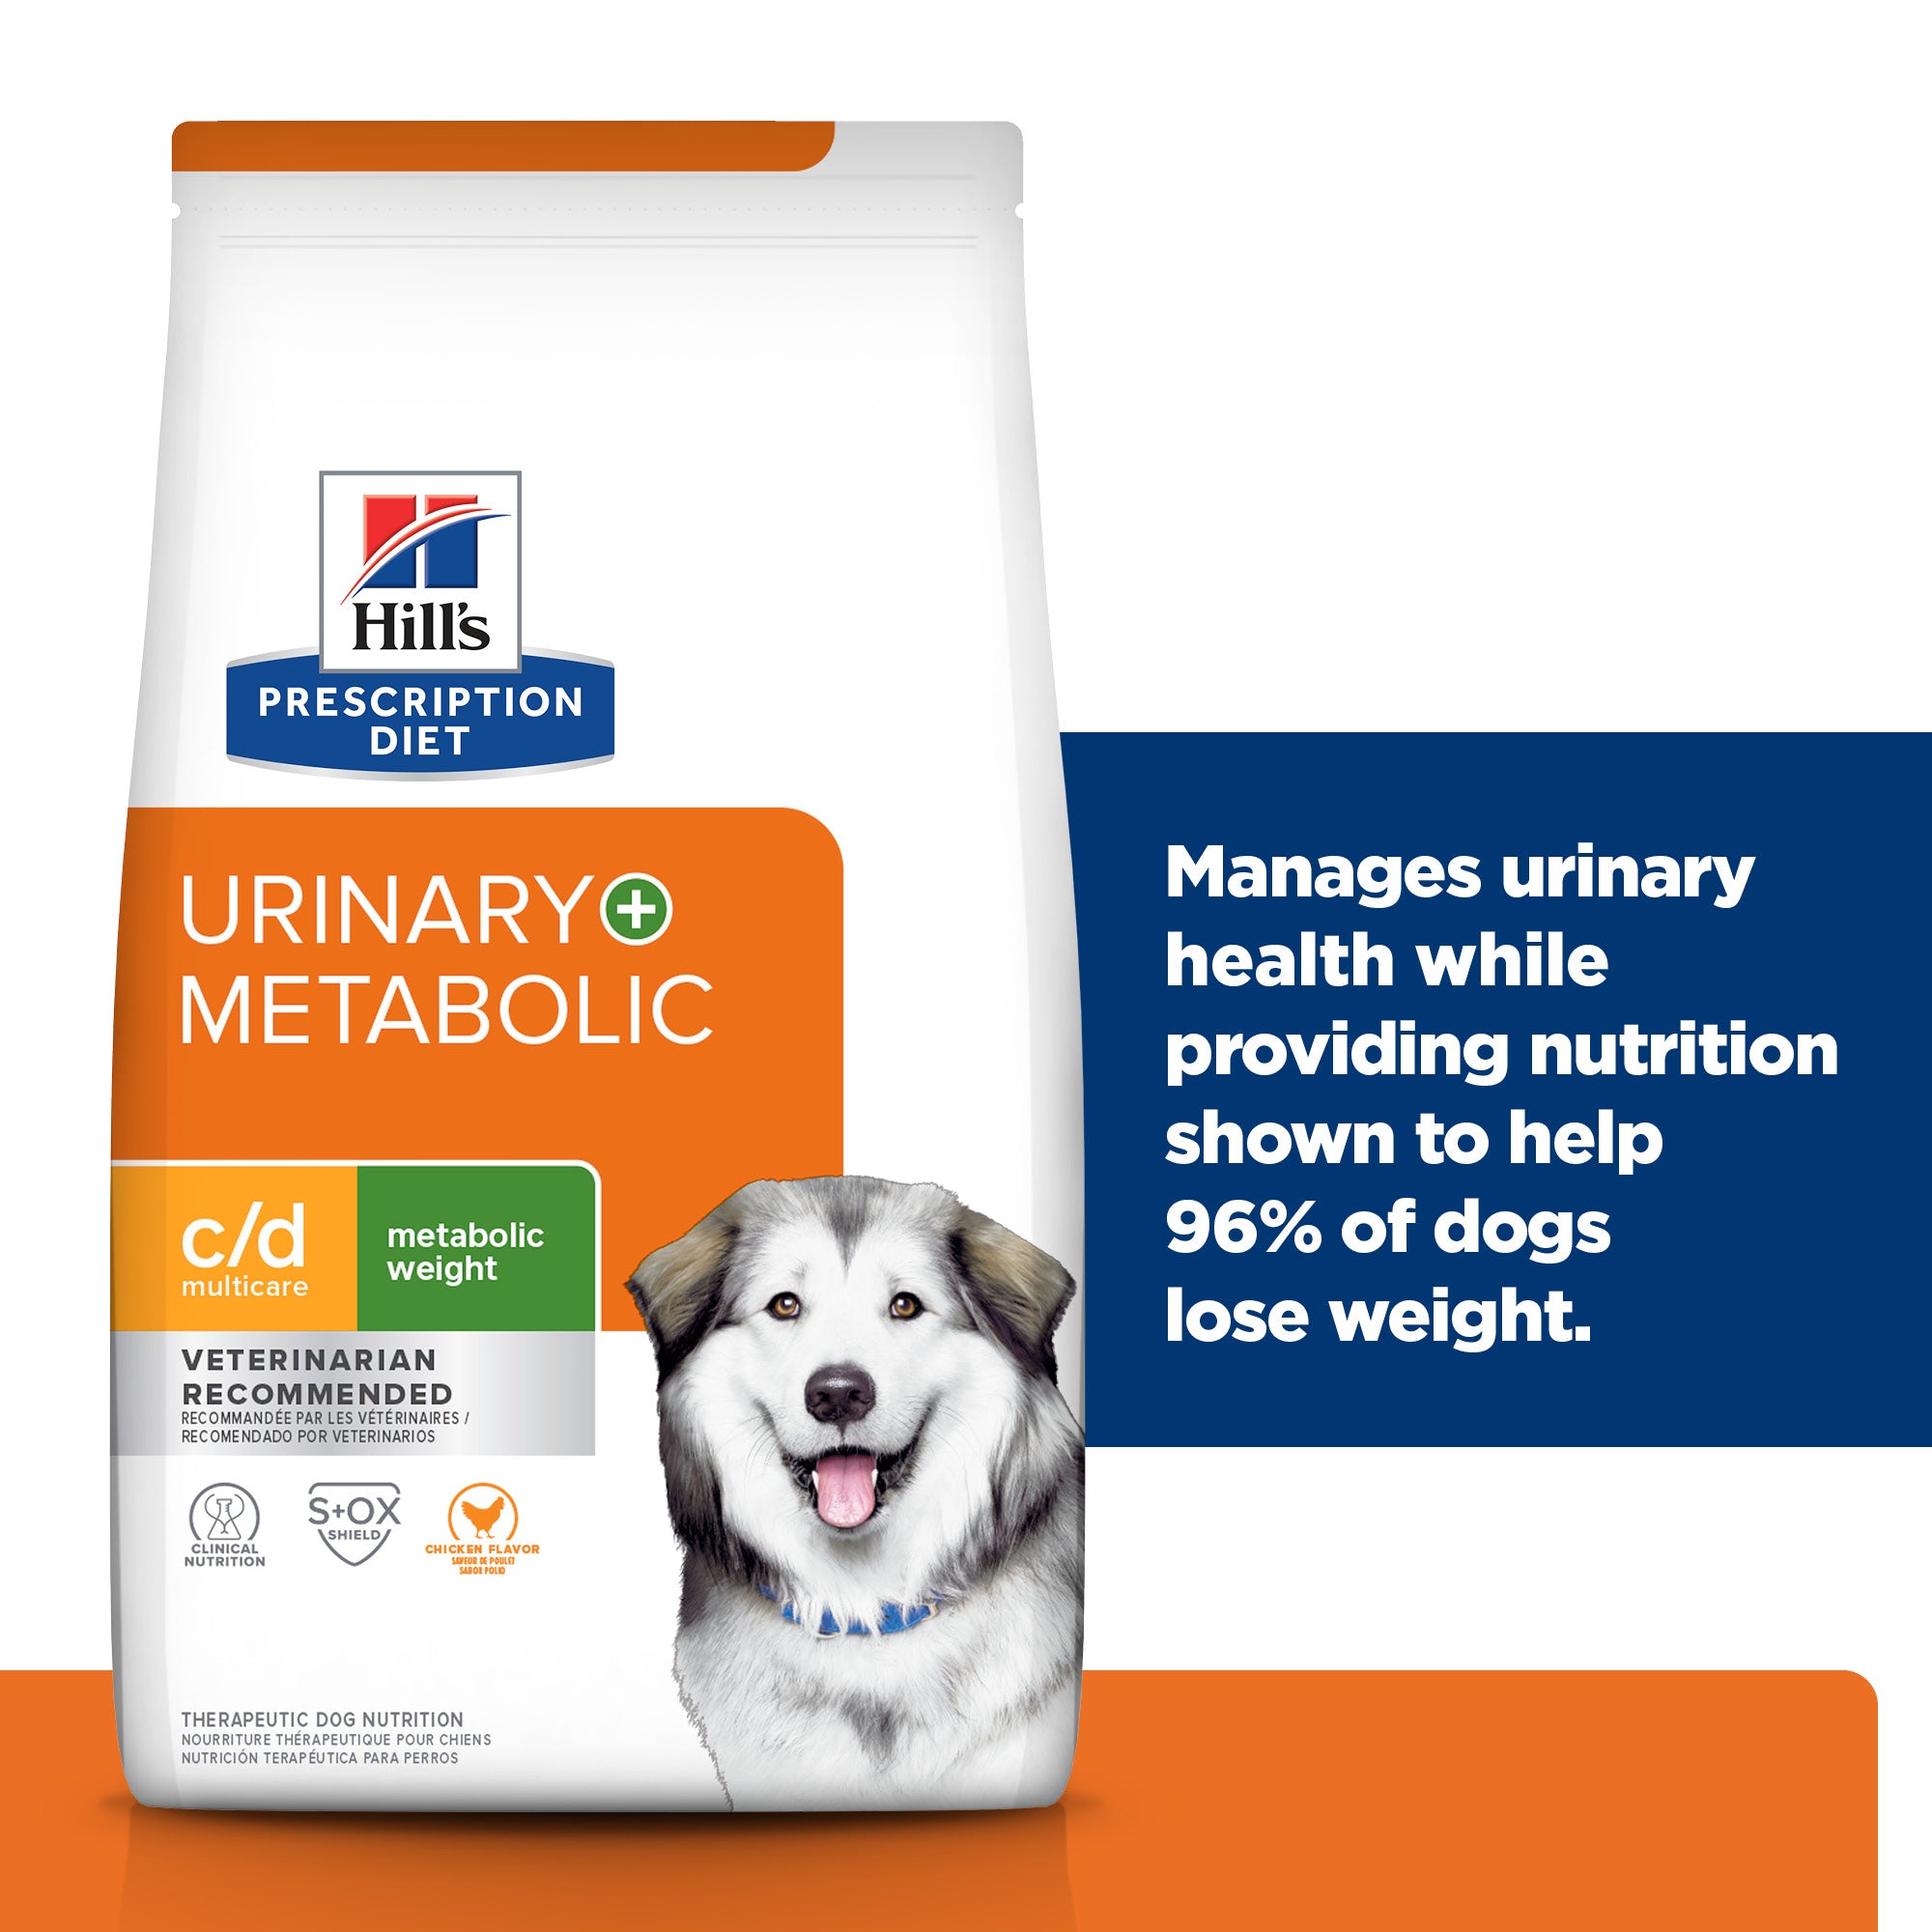 Hill's Prescription Diet c/d Multicare Urinary Care + Metabolic Weight Canine Dry Dog Food 3.86kg